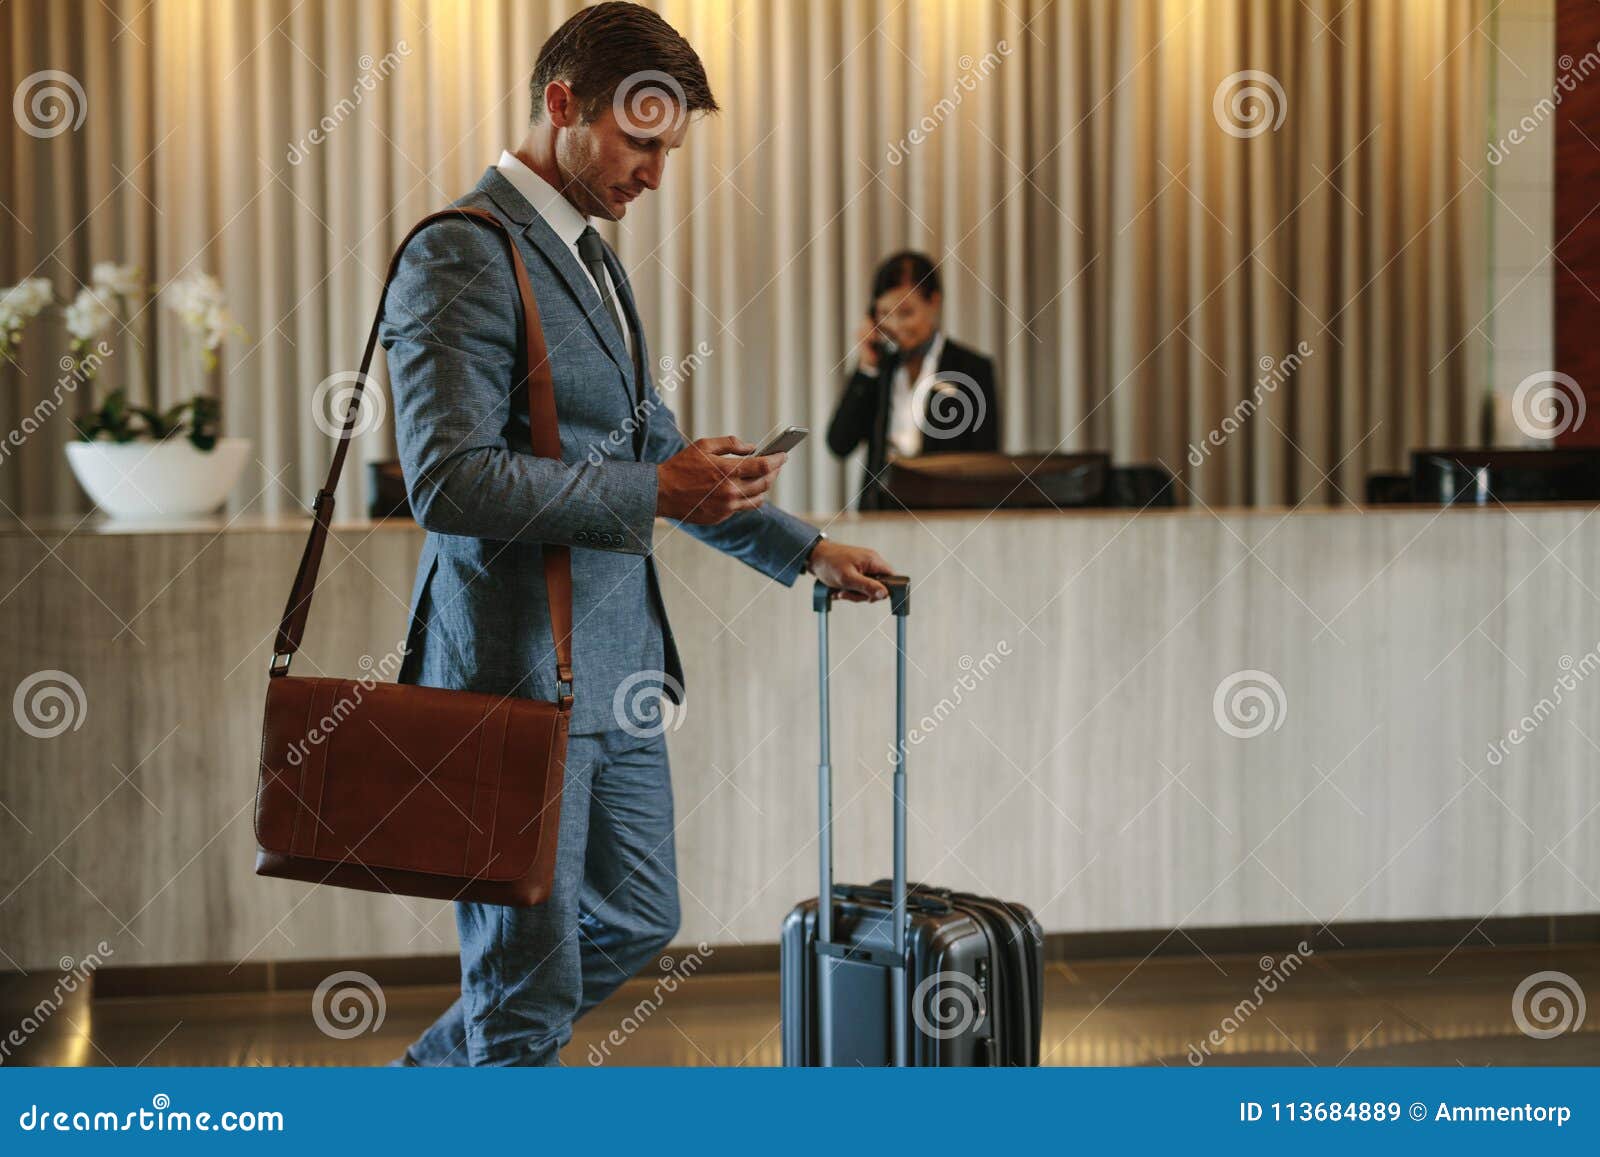 business travel hotel industry